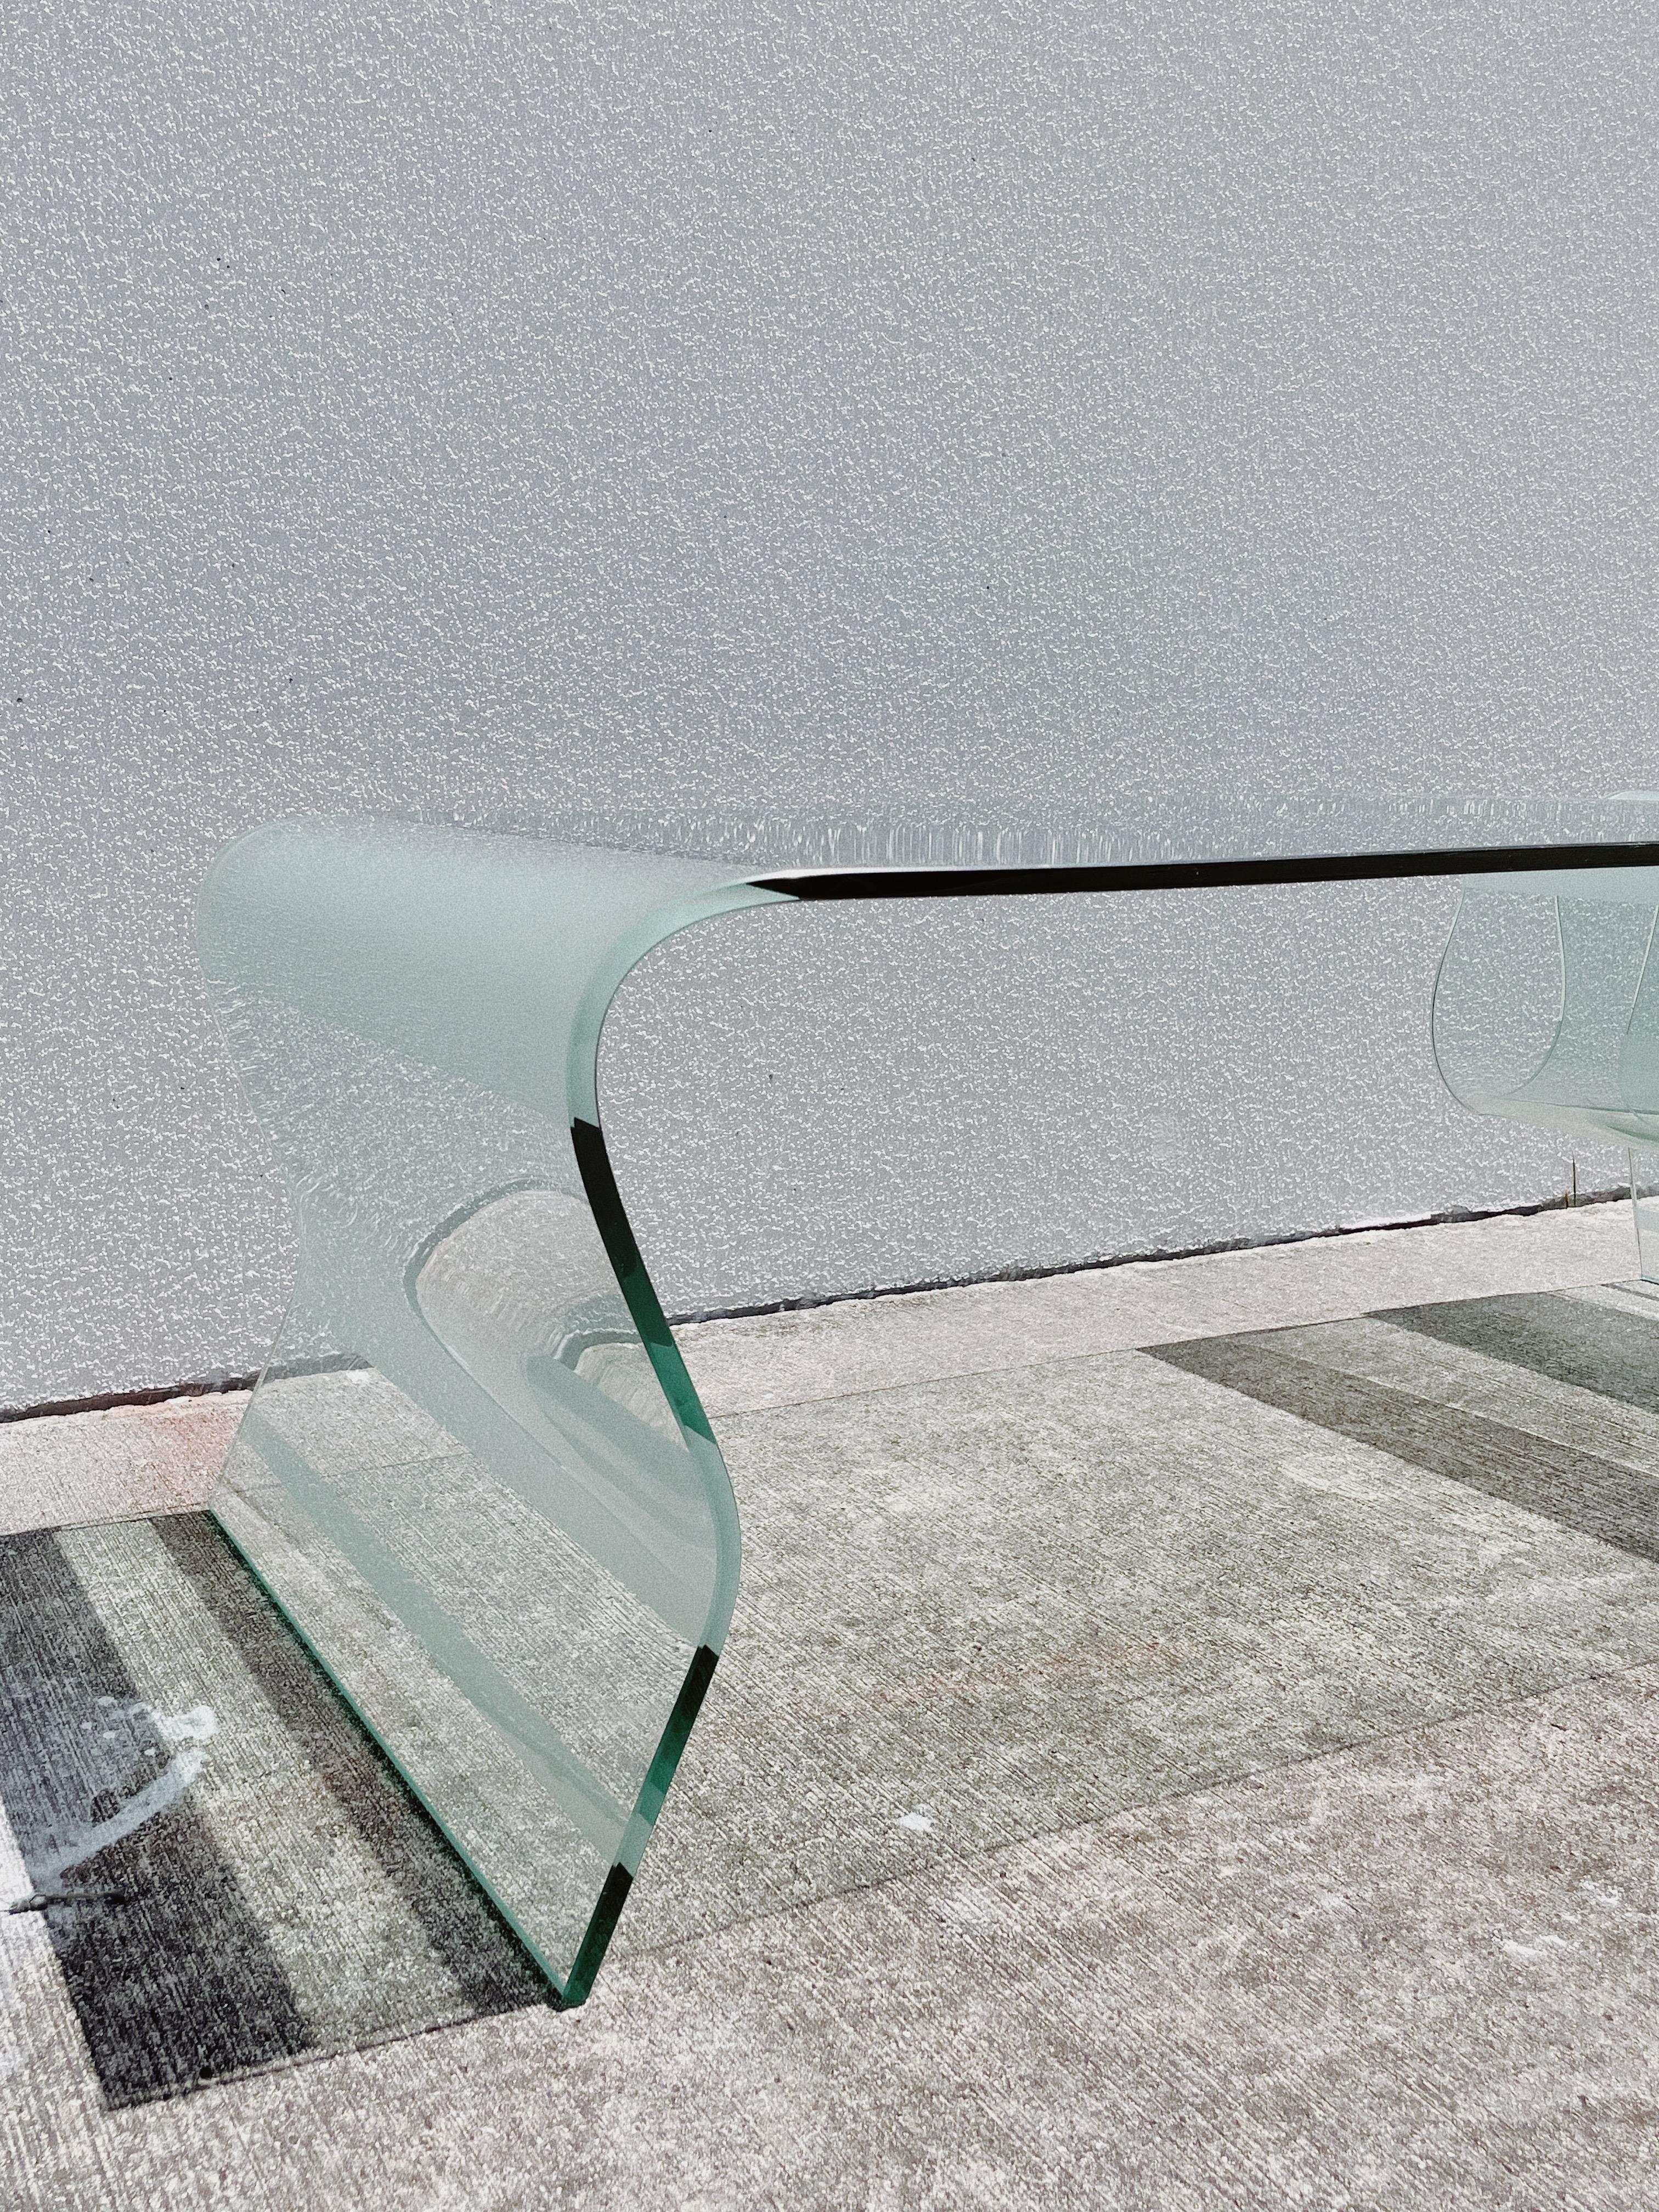 Post-Modern 1980s Undulating Wavy Glass Coffee Table With Frosted Accents For Sale